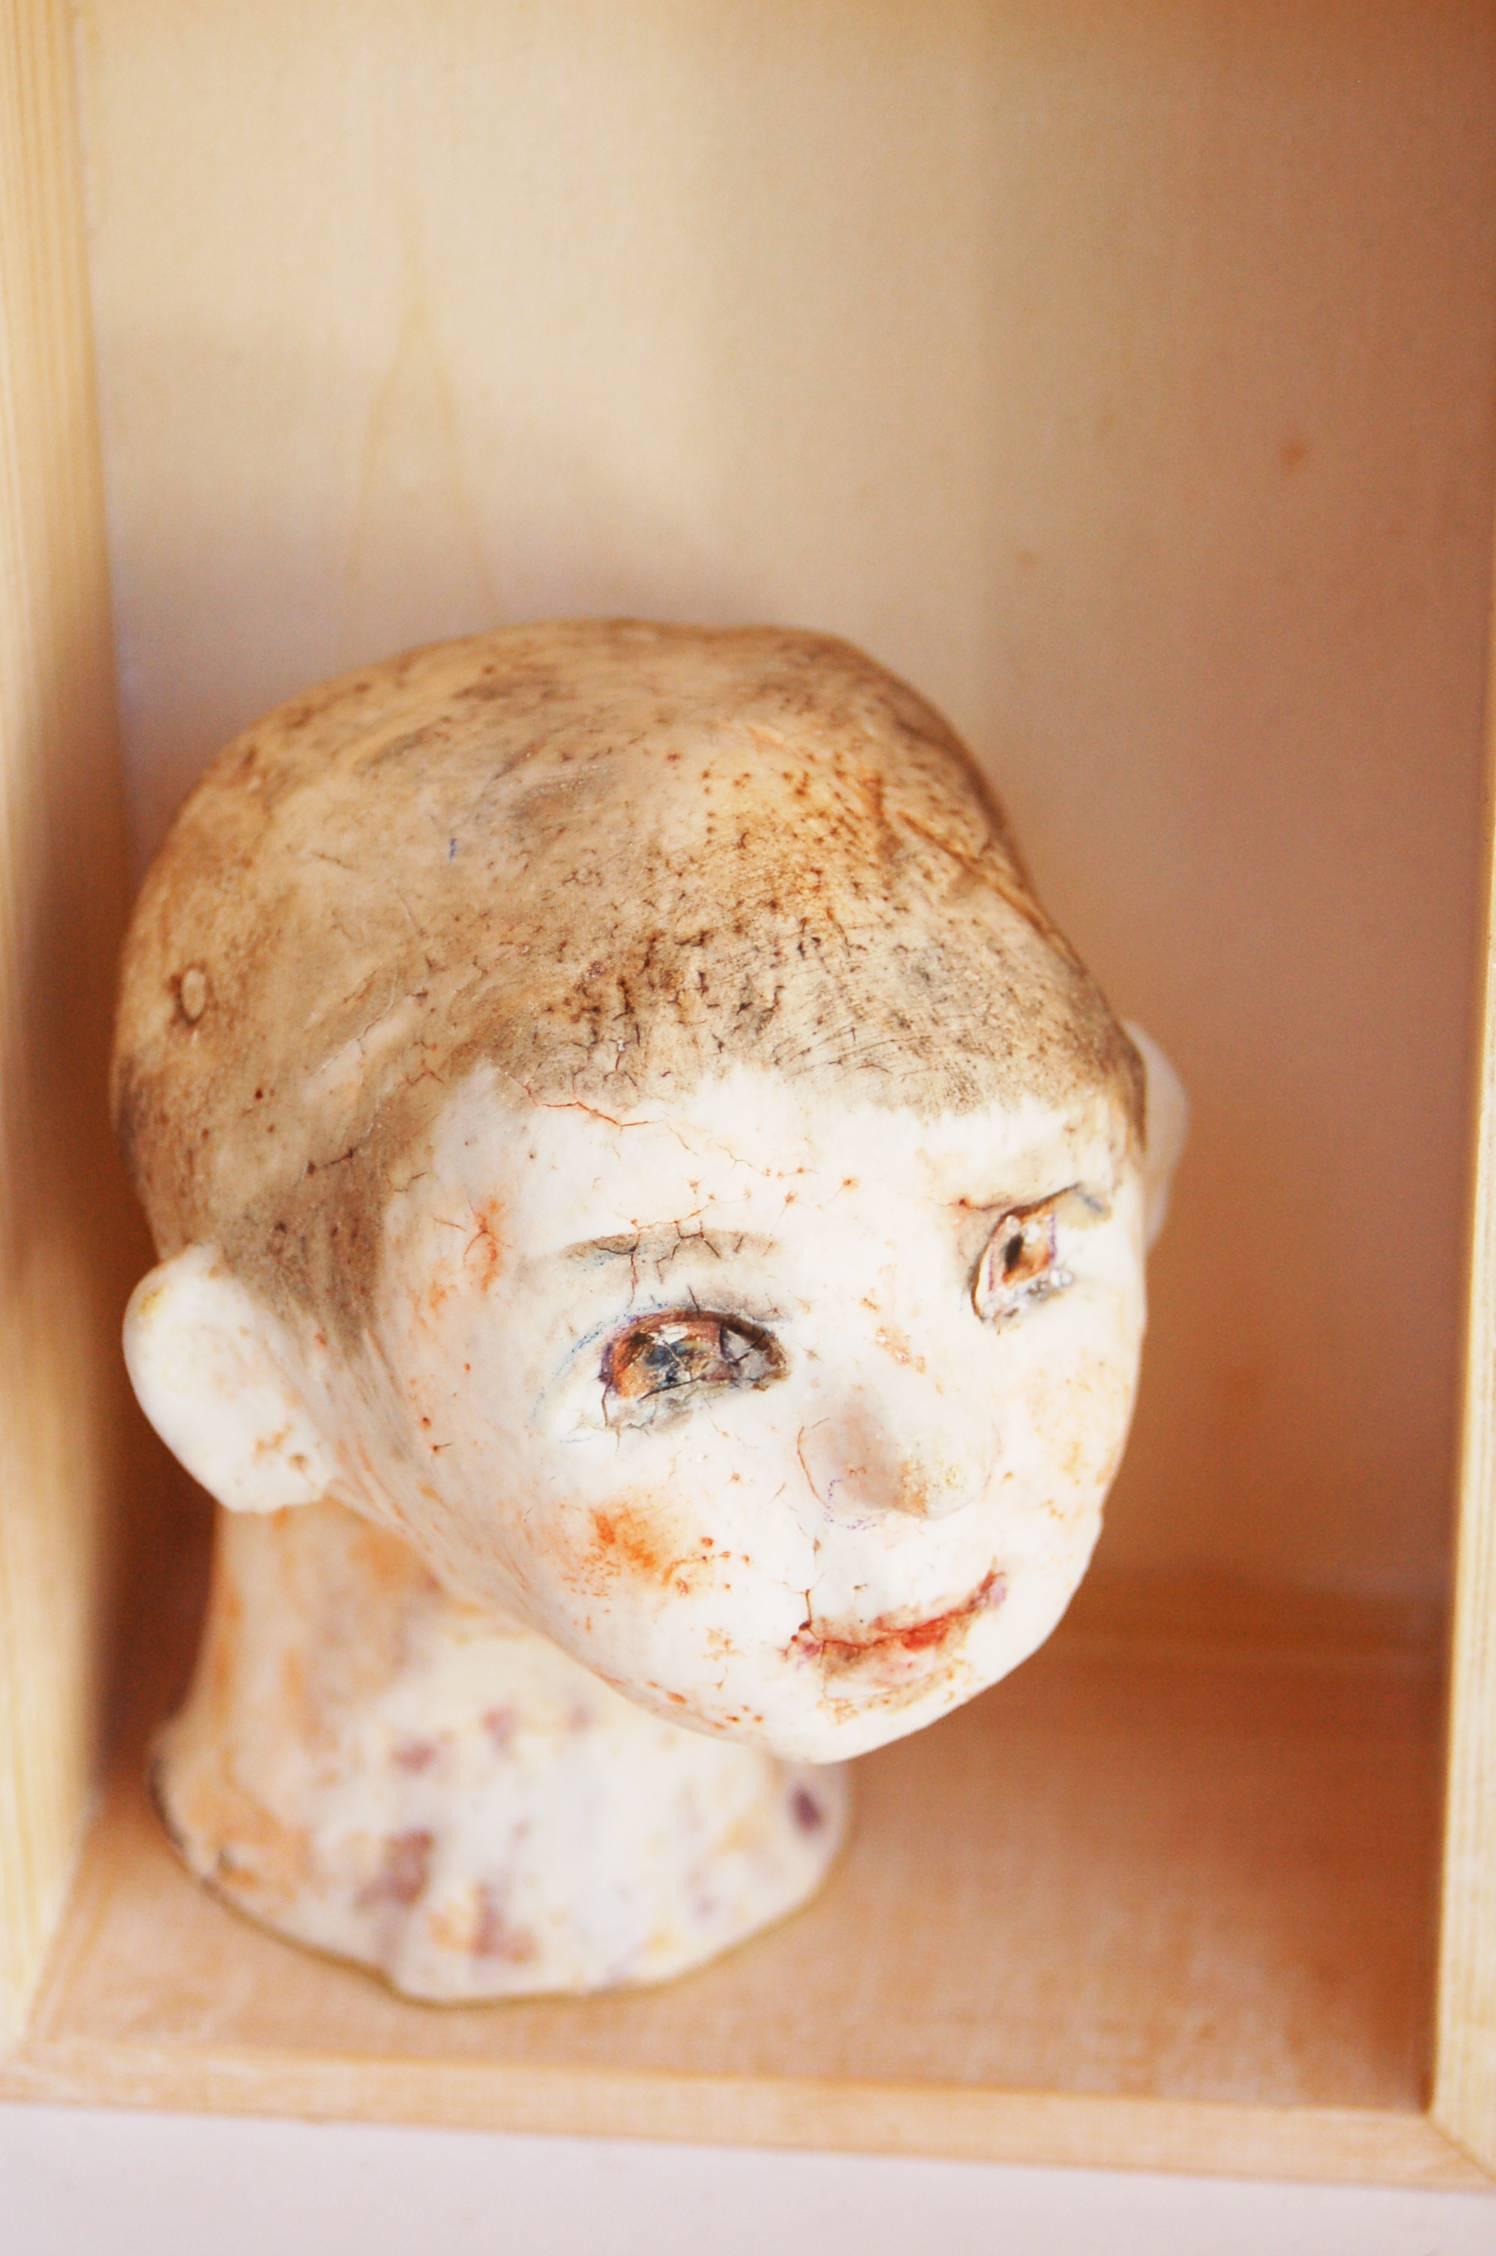 This sculpture by Macu Jordà represents two children who seem to be looking out of the window. She manages to capture the innocence of that age. Each sculpture is signed on the clay and this work comes with a 